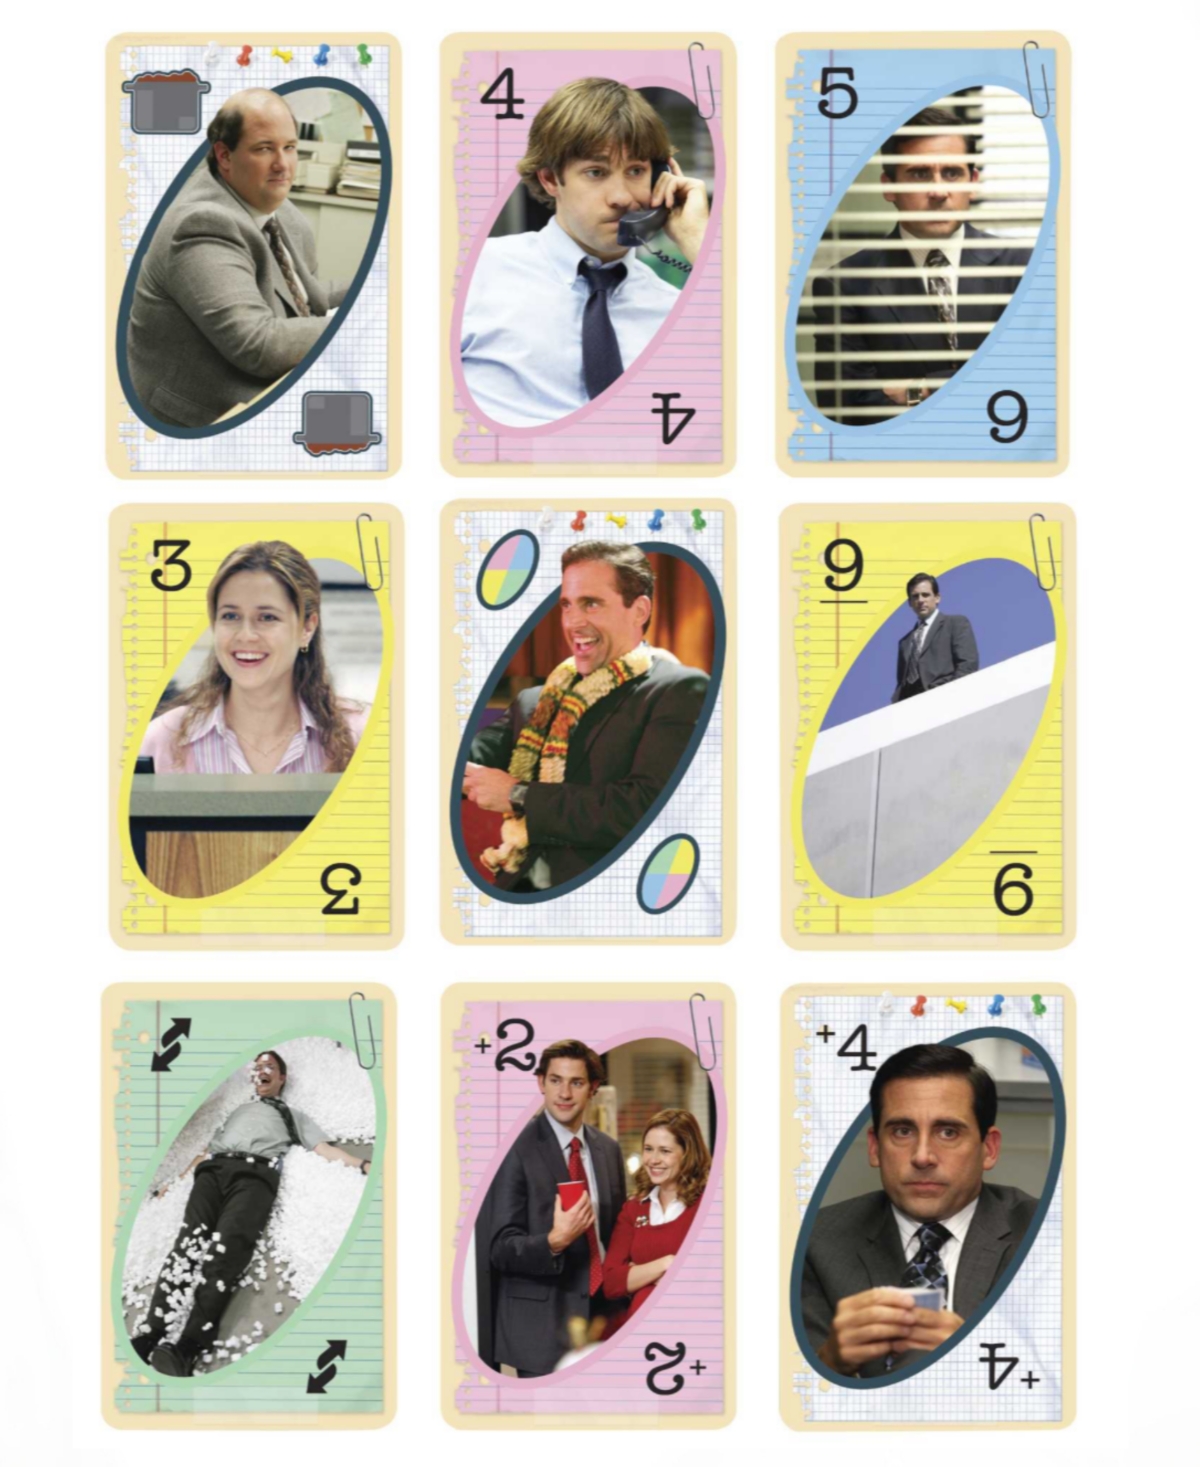 Shop Mattel - The American Tv Show The Office Uno Card Family Game Night In Multi